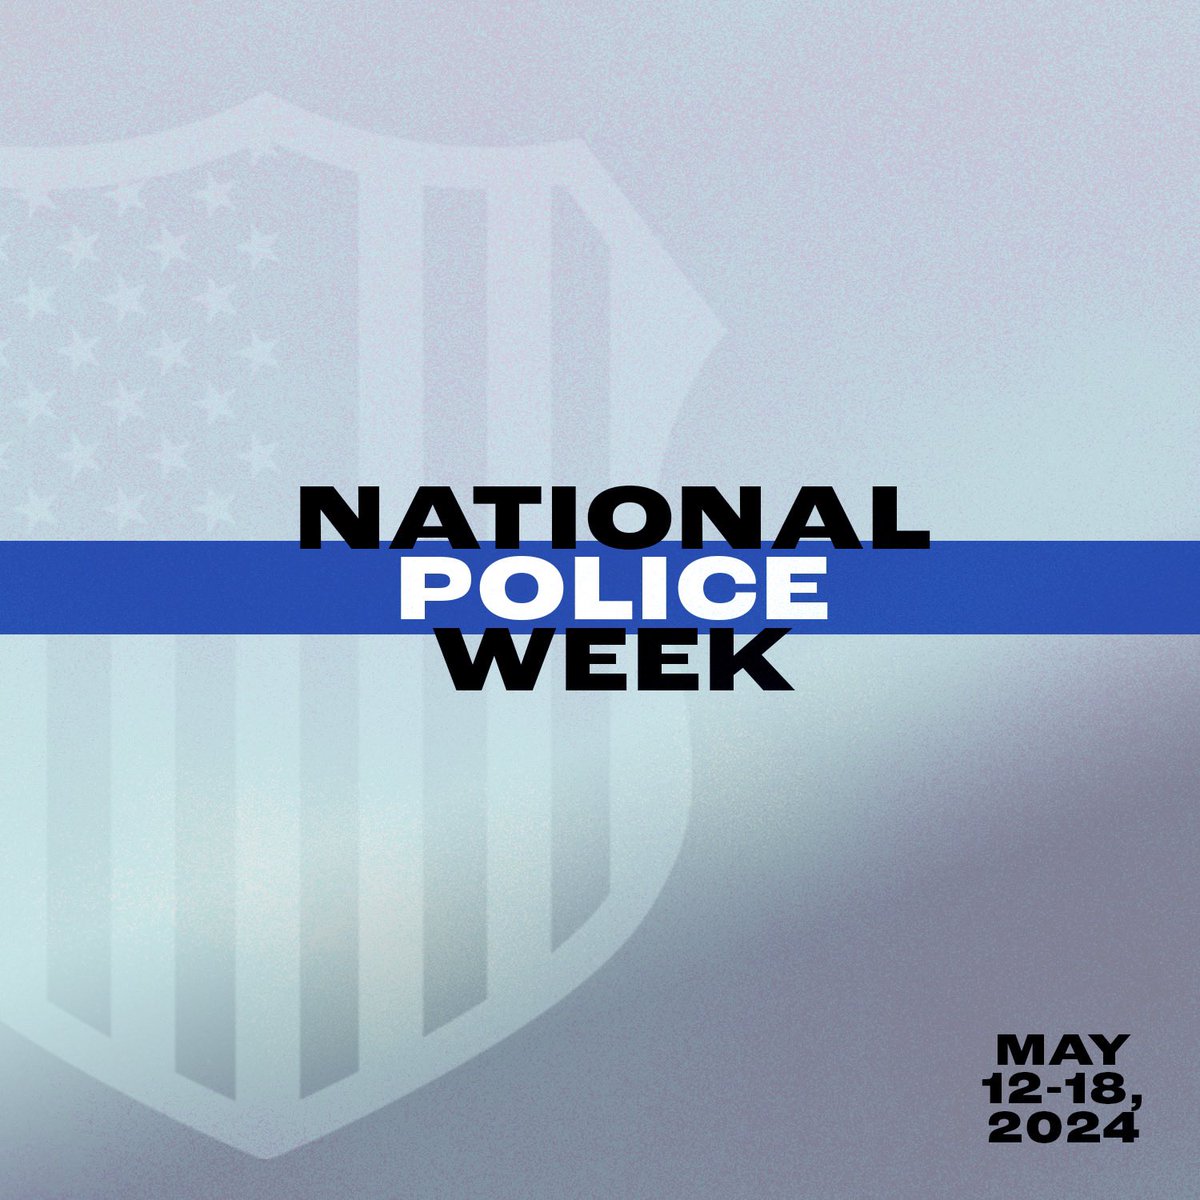 It's National Police Week, where we show our gratitude for the men and women in uniform stand between our communities and criminals who wish to do us harm. We should honor their service every week, and Congress should come together and pass the THIN BLUE LINE ACT to raise the